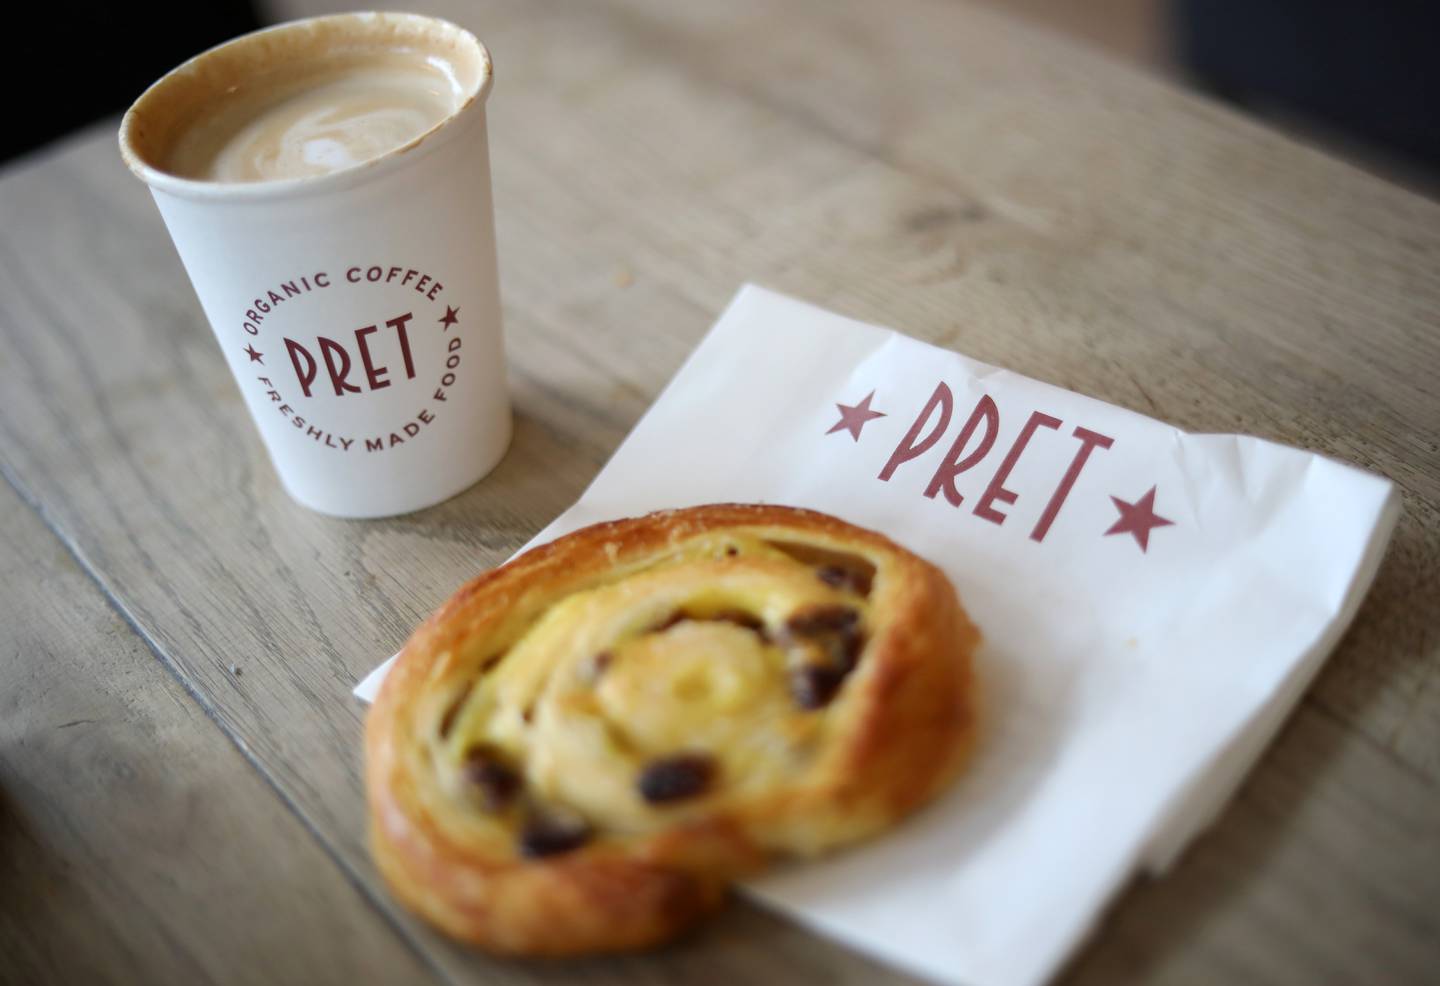 Pret announced last month that it plans to open 20 shops in the UAE over the next few years as it seeks to double the size of its business in the next five years. Reuters